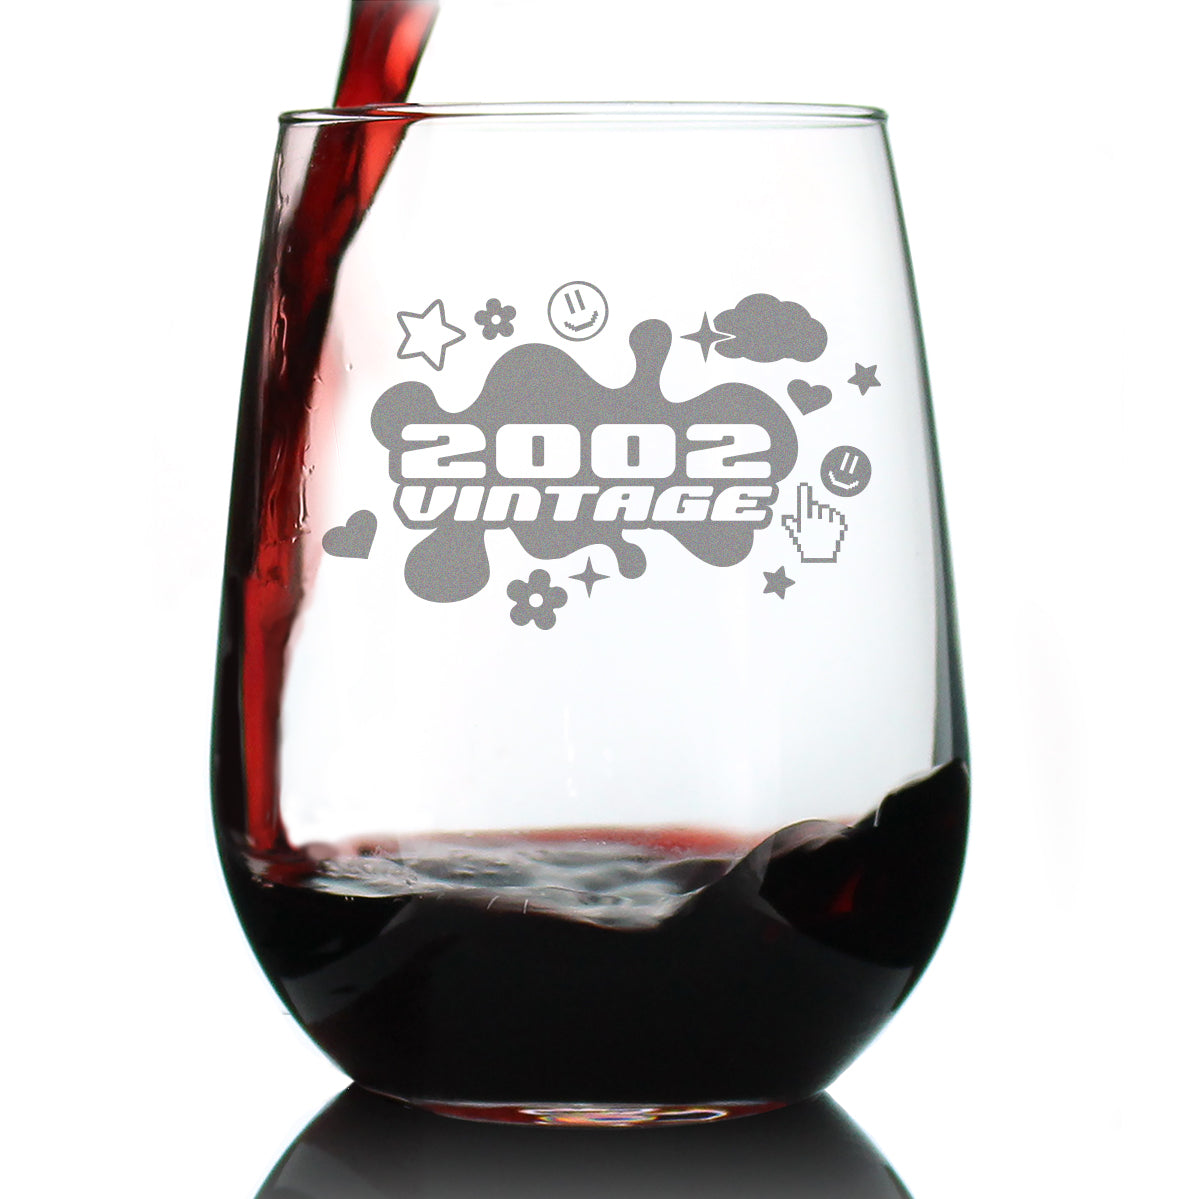 Vintage 2002 - 22nd Birthday Stemless Wine Glass Gifts for Women &amp; Men Turning 22 - Bday Party Decor - Large Glasses